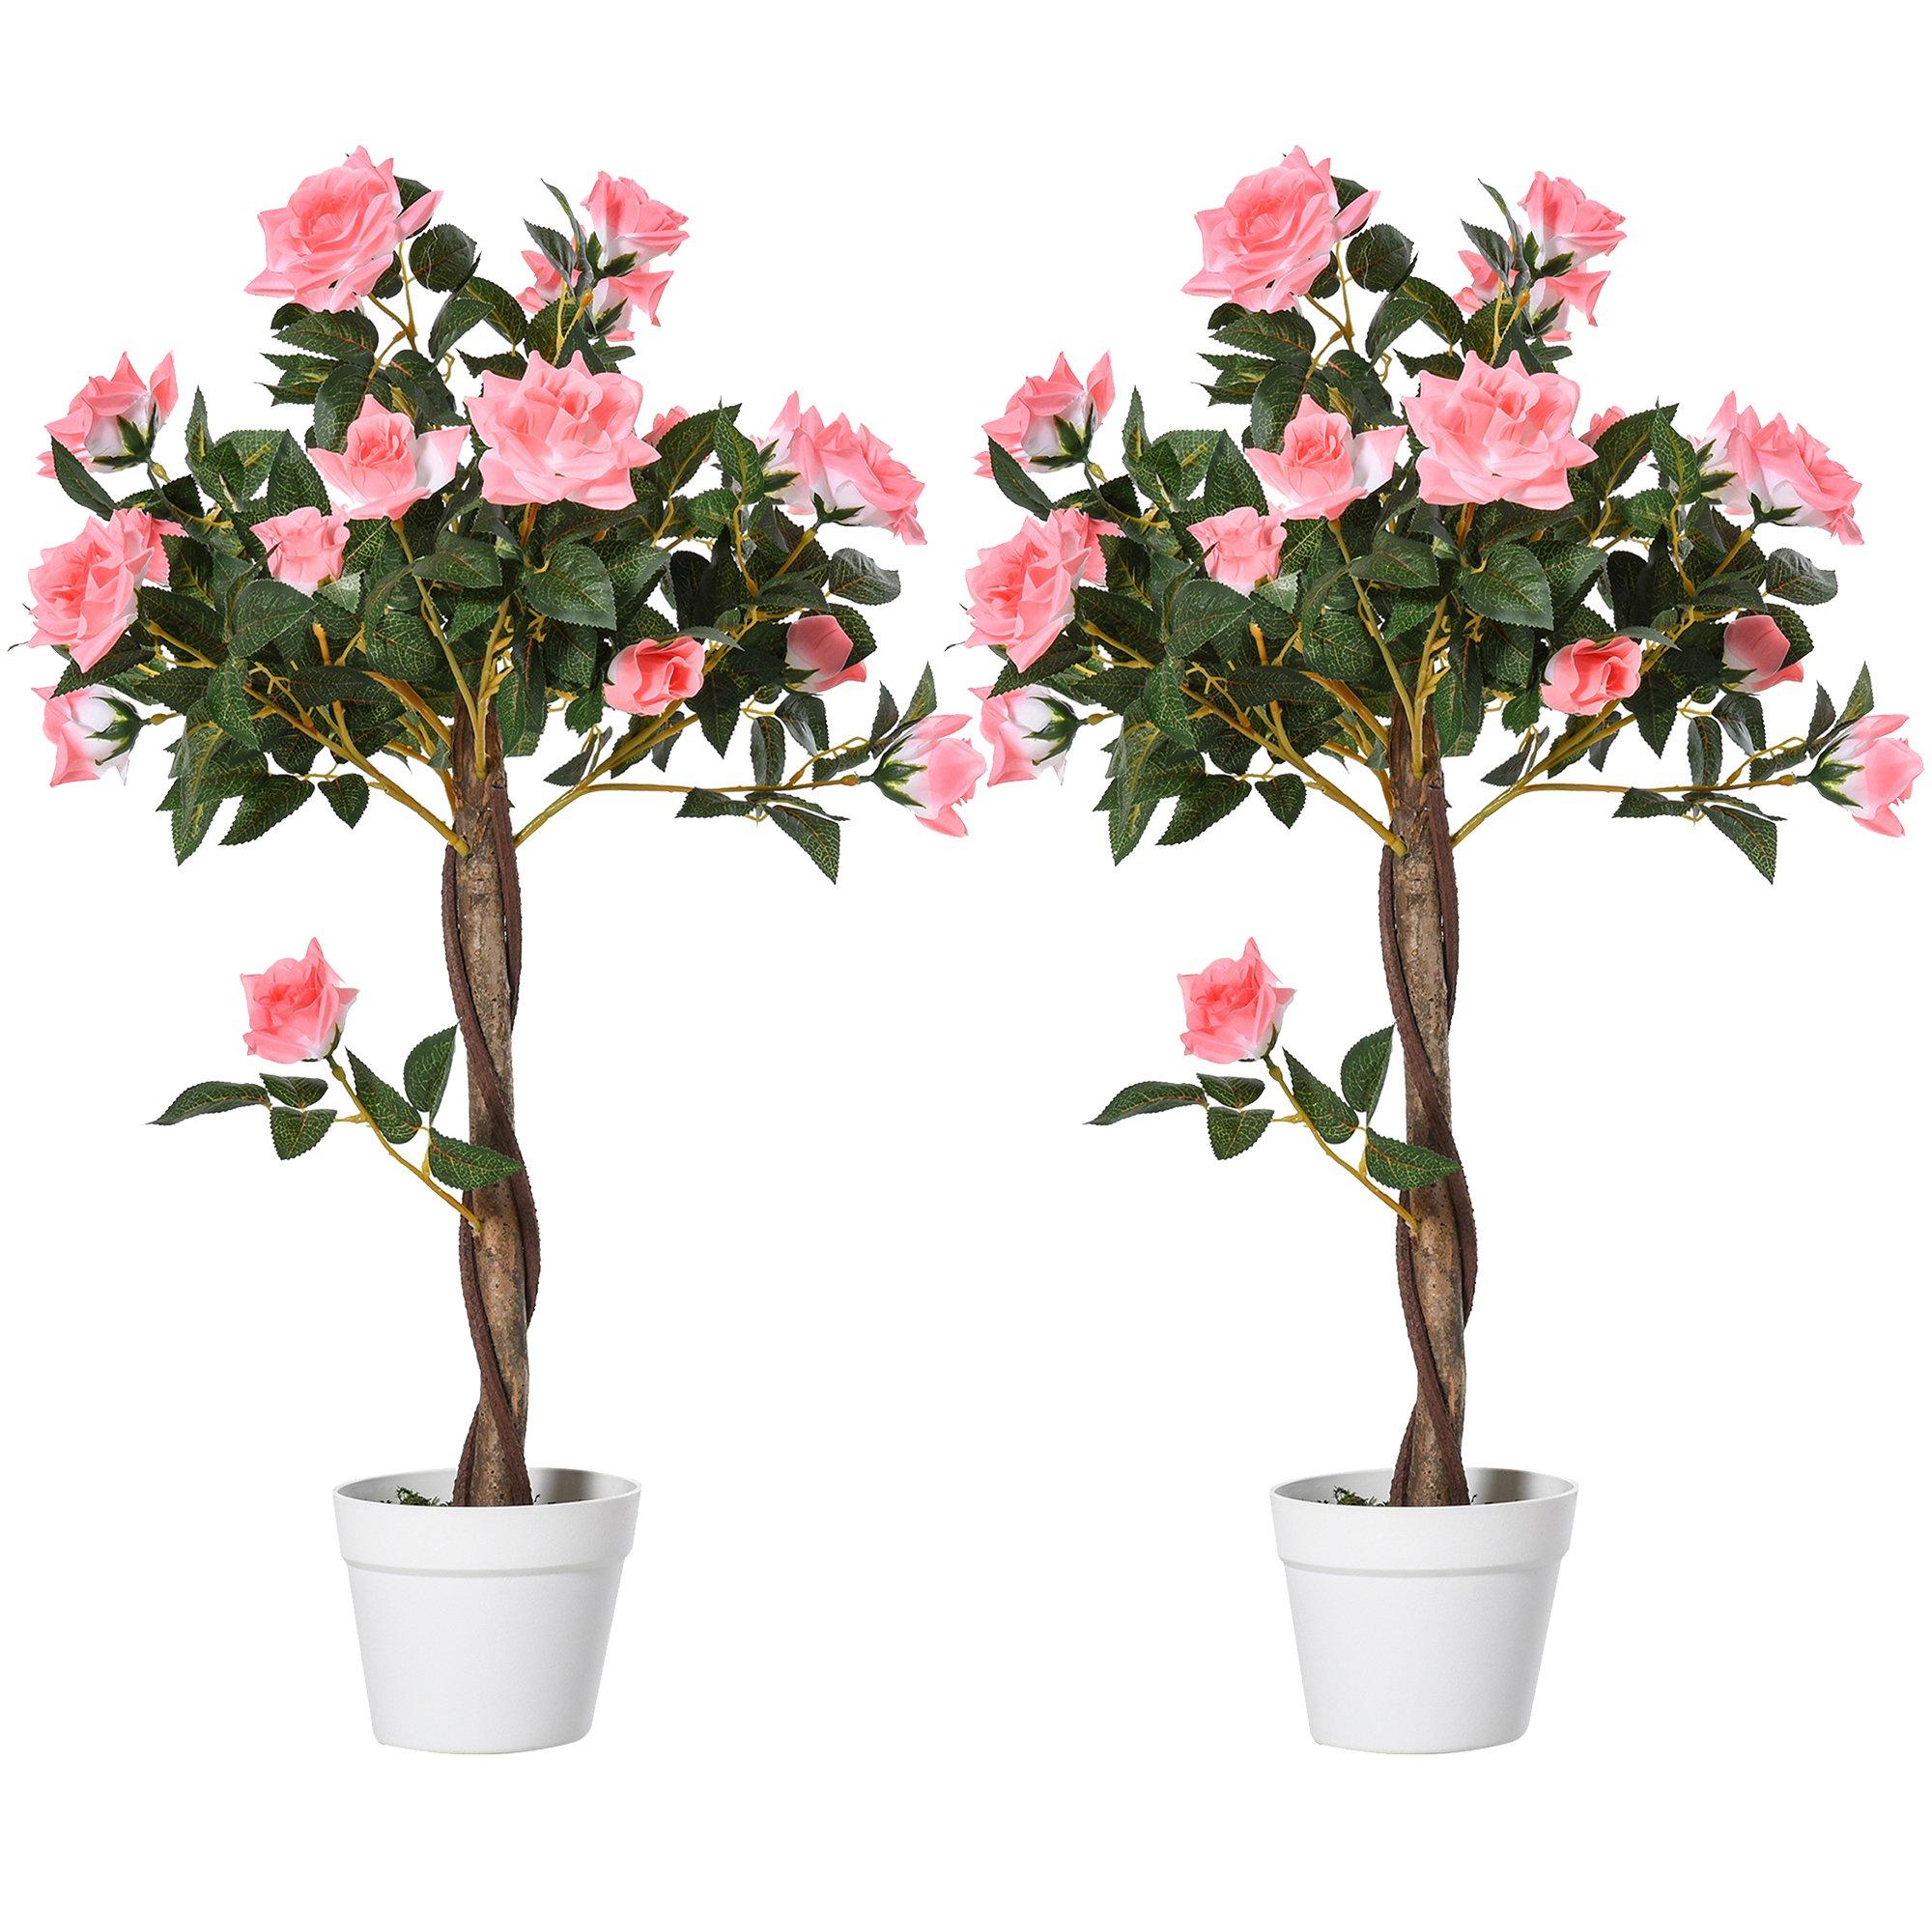 2 Pack 90cm/3FT Artificial Rose Tree Fake Decorative Plant